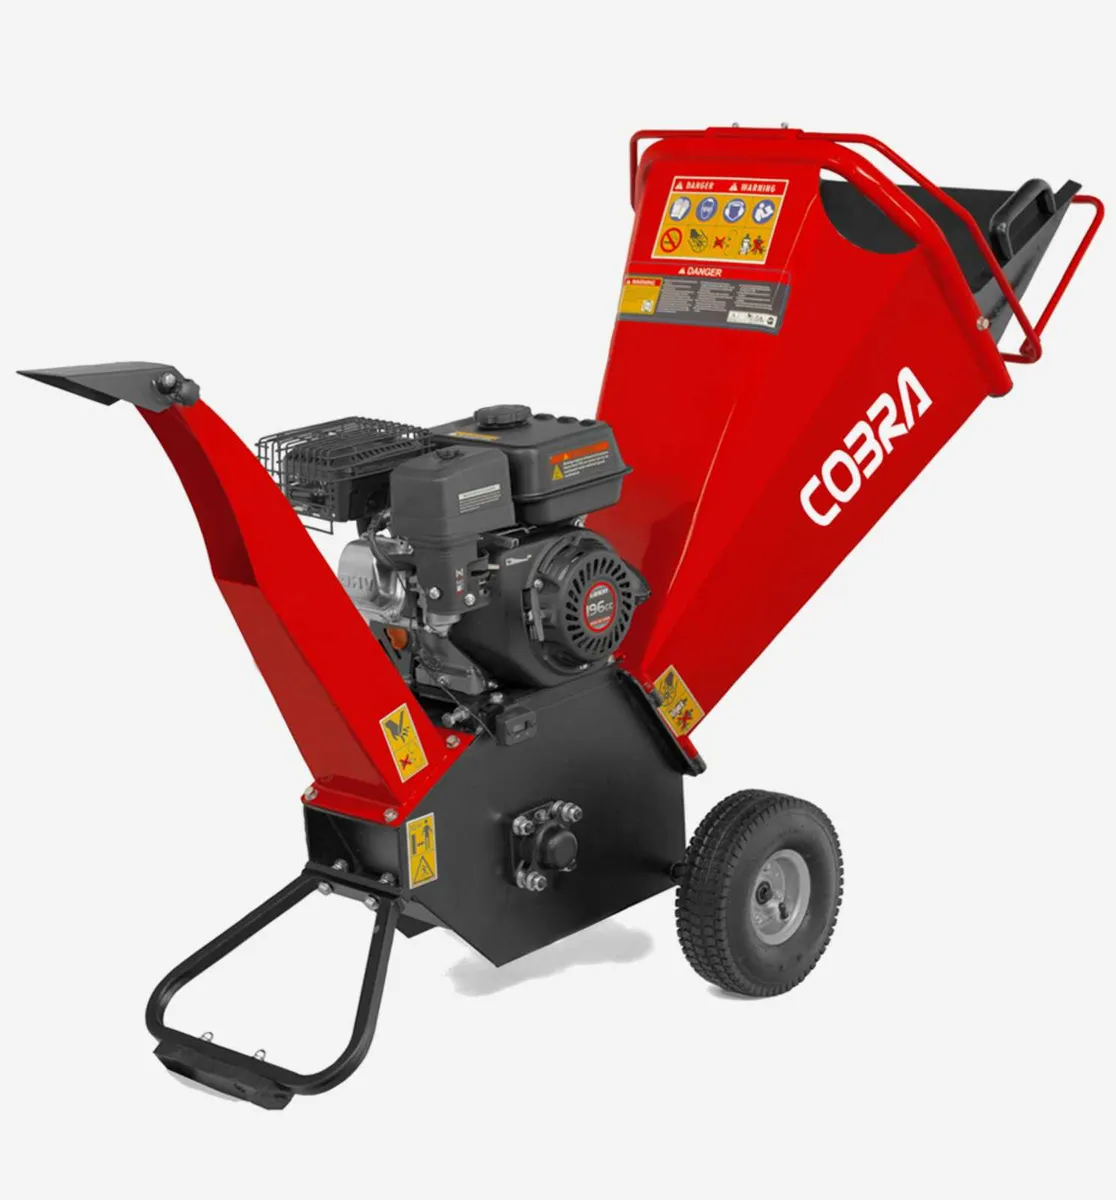 Garden Shredders & Chippers - Free delivery